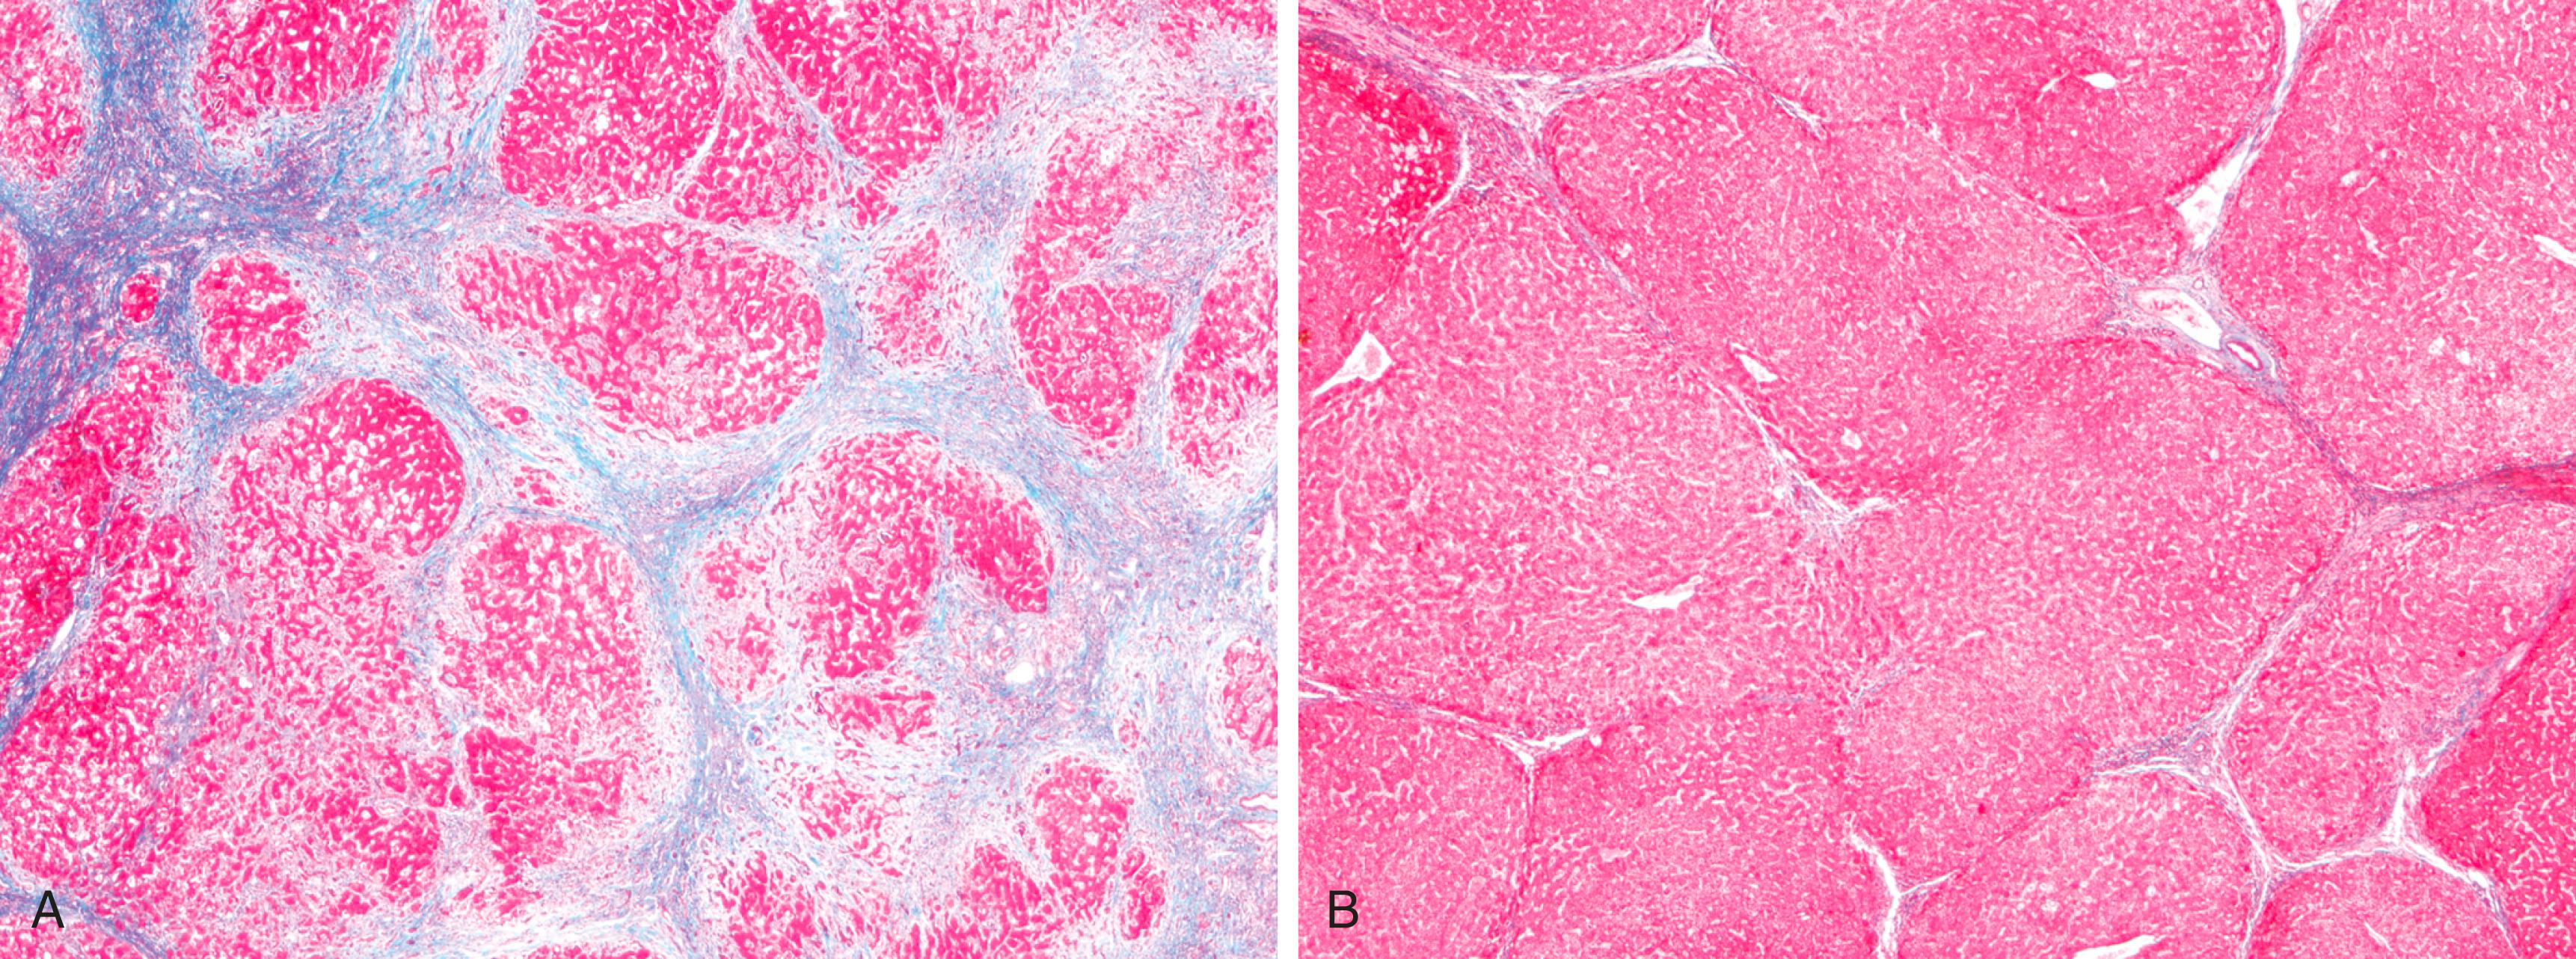 FIG. 14.6, Alcohol-related cirrhosis in a patient who was actively drinking (A) and following long-term abstinence (B). (A) Thick bands of collagen separate rounded cirrhotic nodules. (B) After 1 year of abstinence, most scars are gone (Masson trichrome stain).